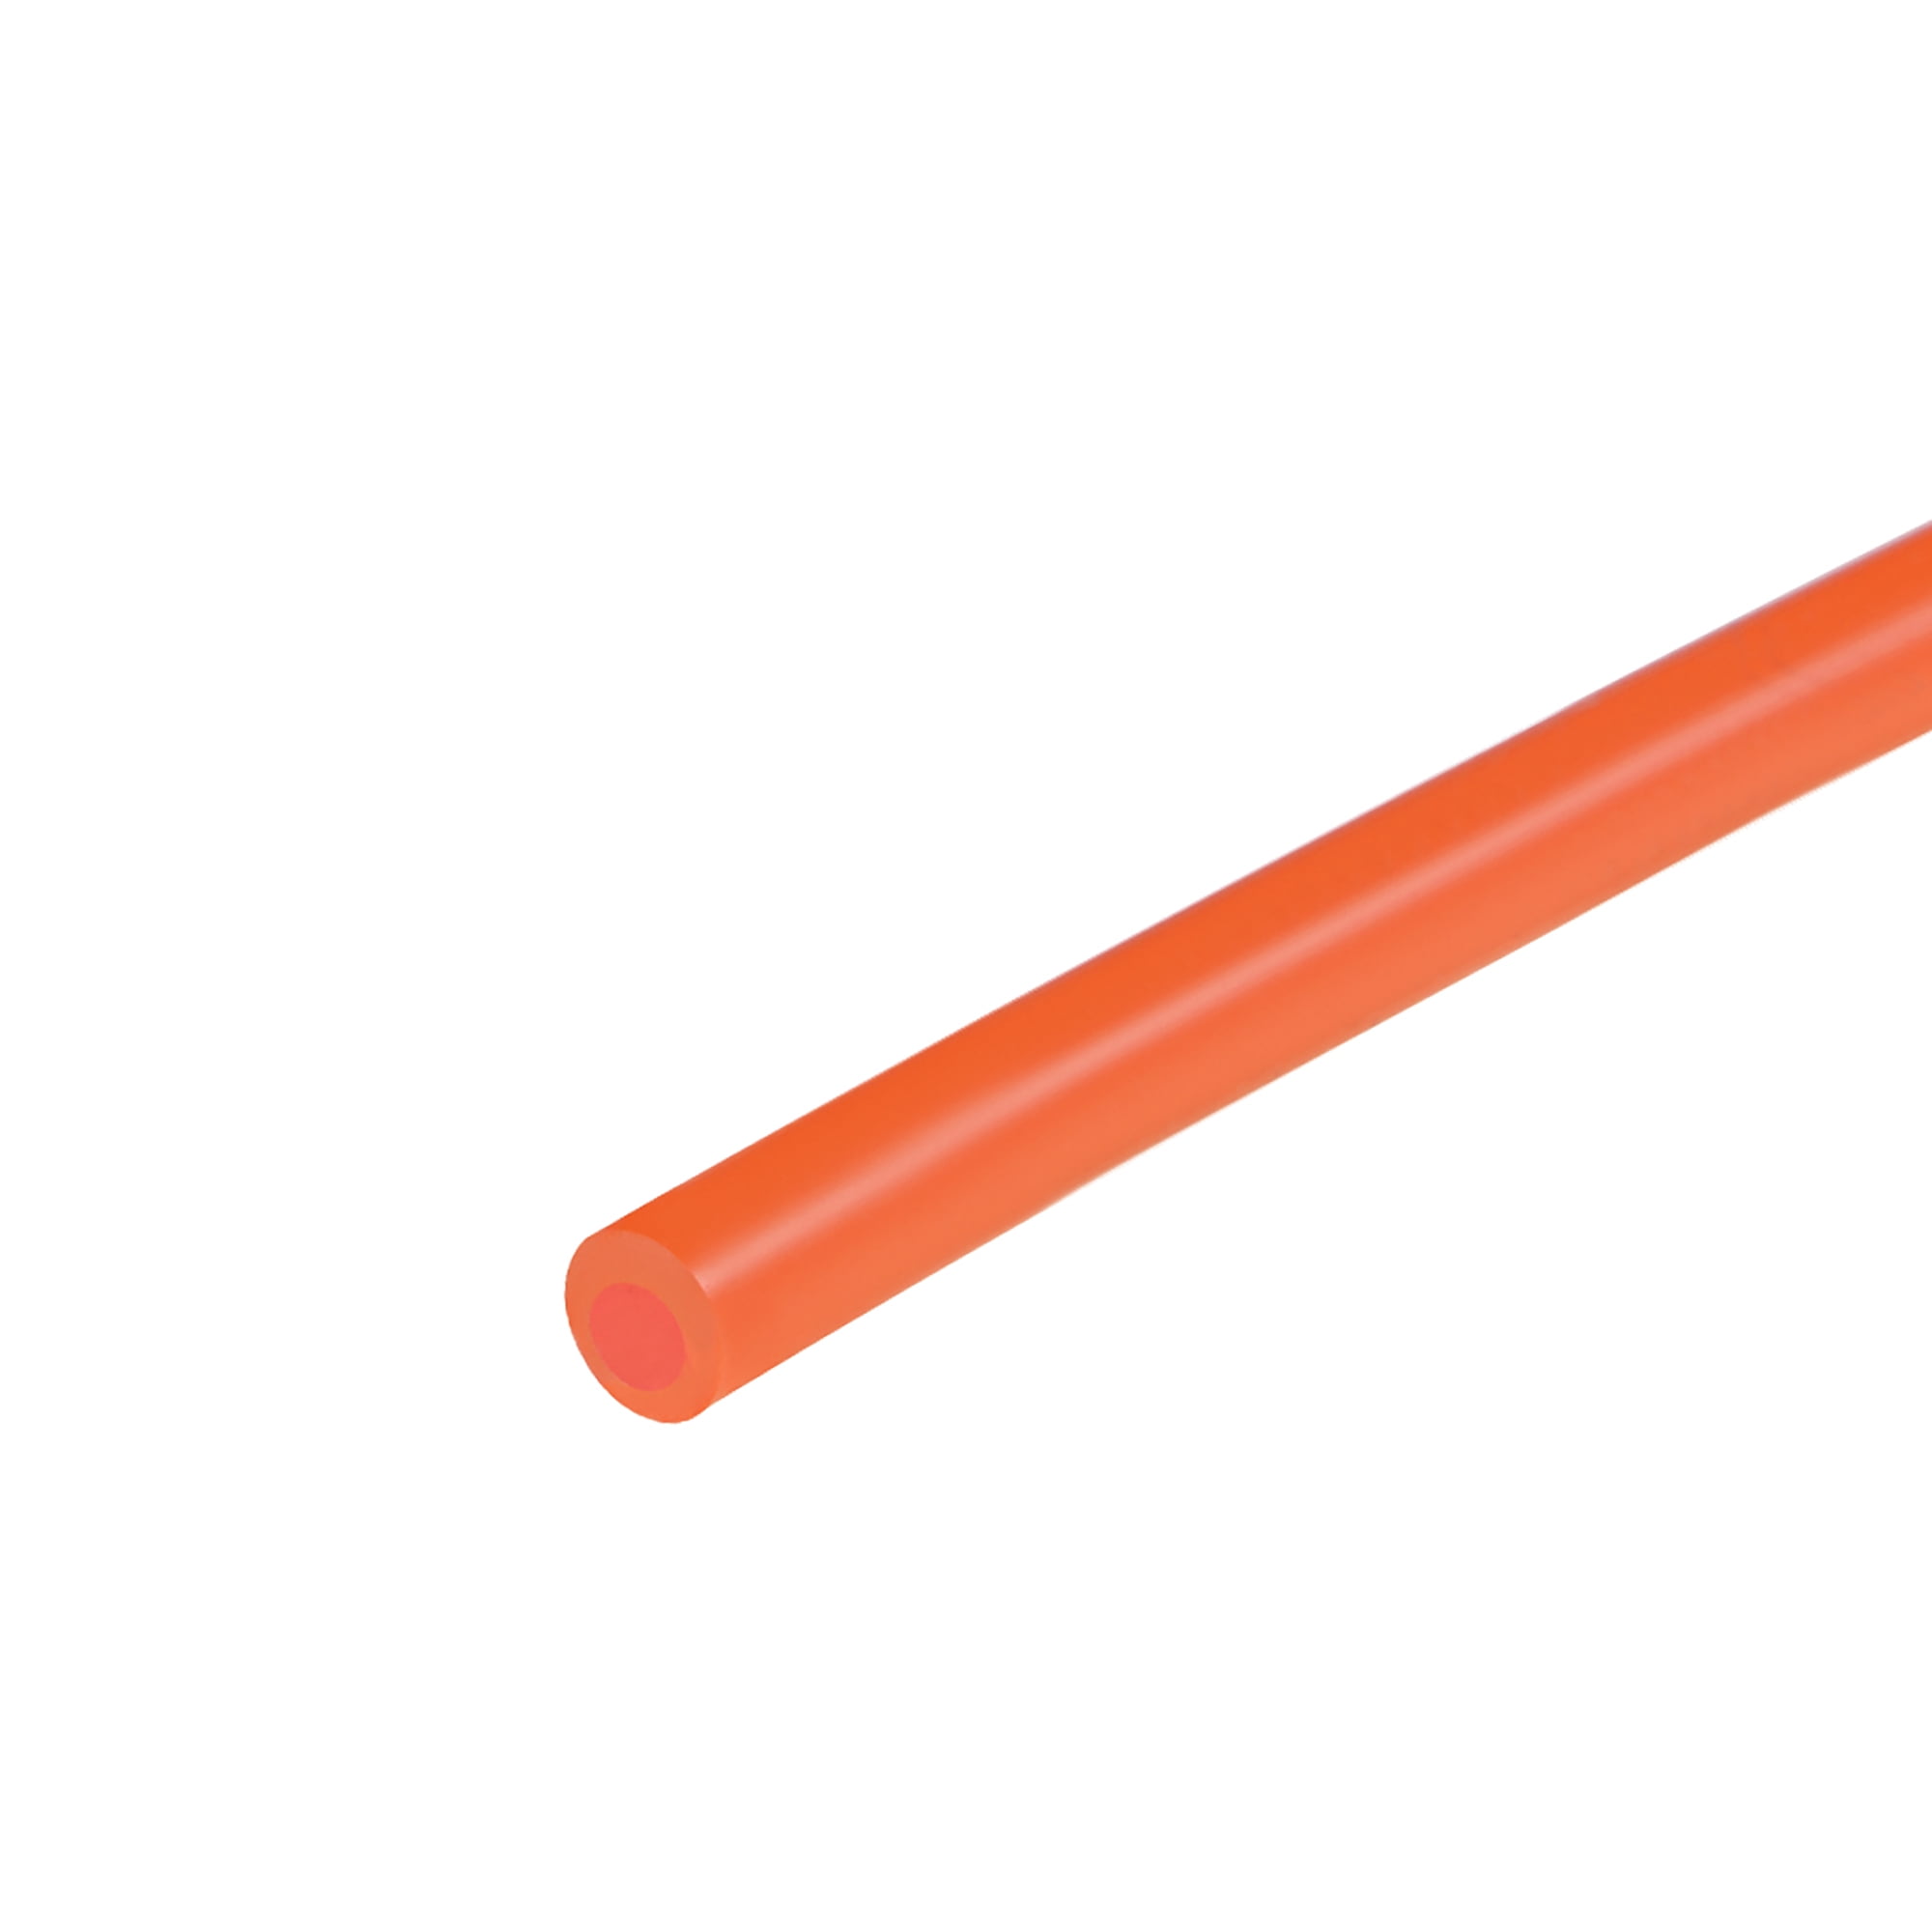 Silicone Transparent Tube - Silicone Transparent Tubing- 4mm ID X 10 mm OD  Manufacturer from Mumbai